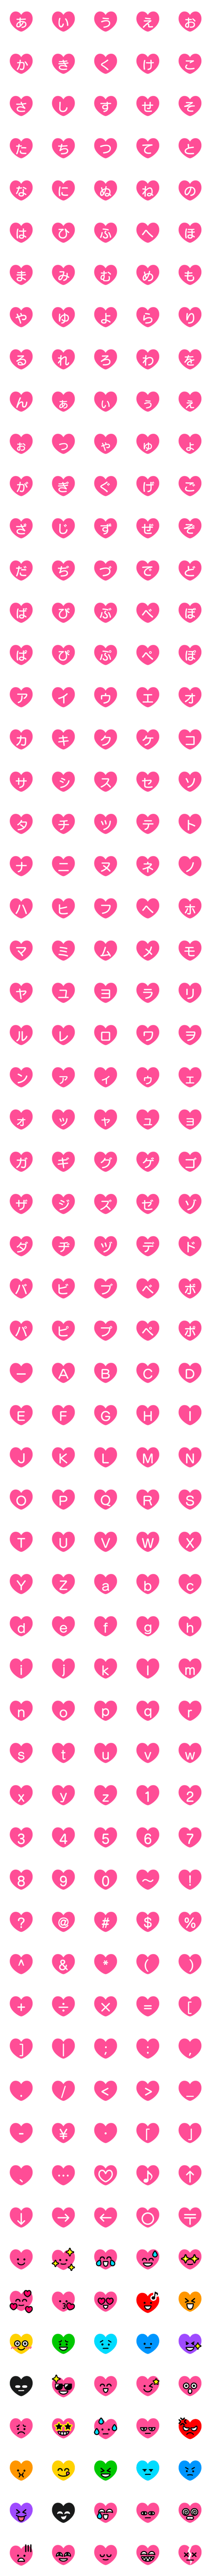 [LINE絵文字]ハート♡の画像一覧